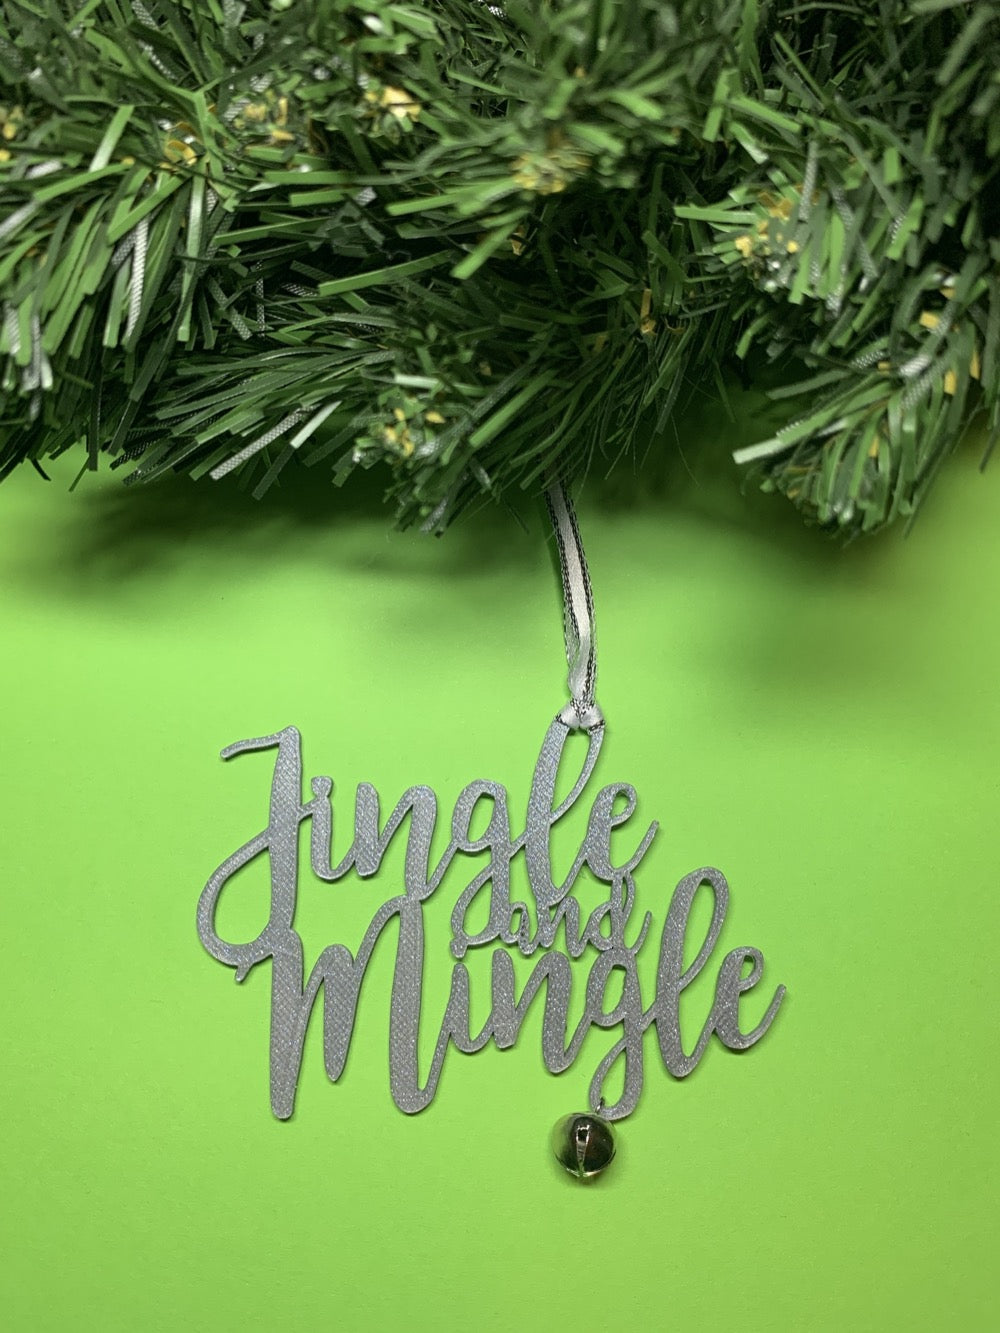 On a bright green background and hanging from a green wreath is a 3D printed R+D ornament. It is a cursive text with a jingle bell and covered in glitter to make it shimmer and shine in the light. This ornament reads, Jingle and Mingle. 